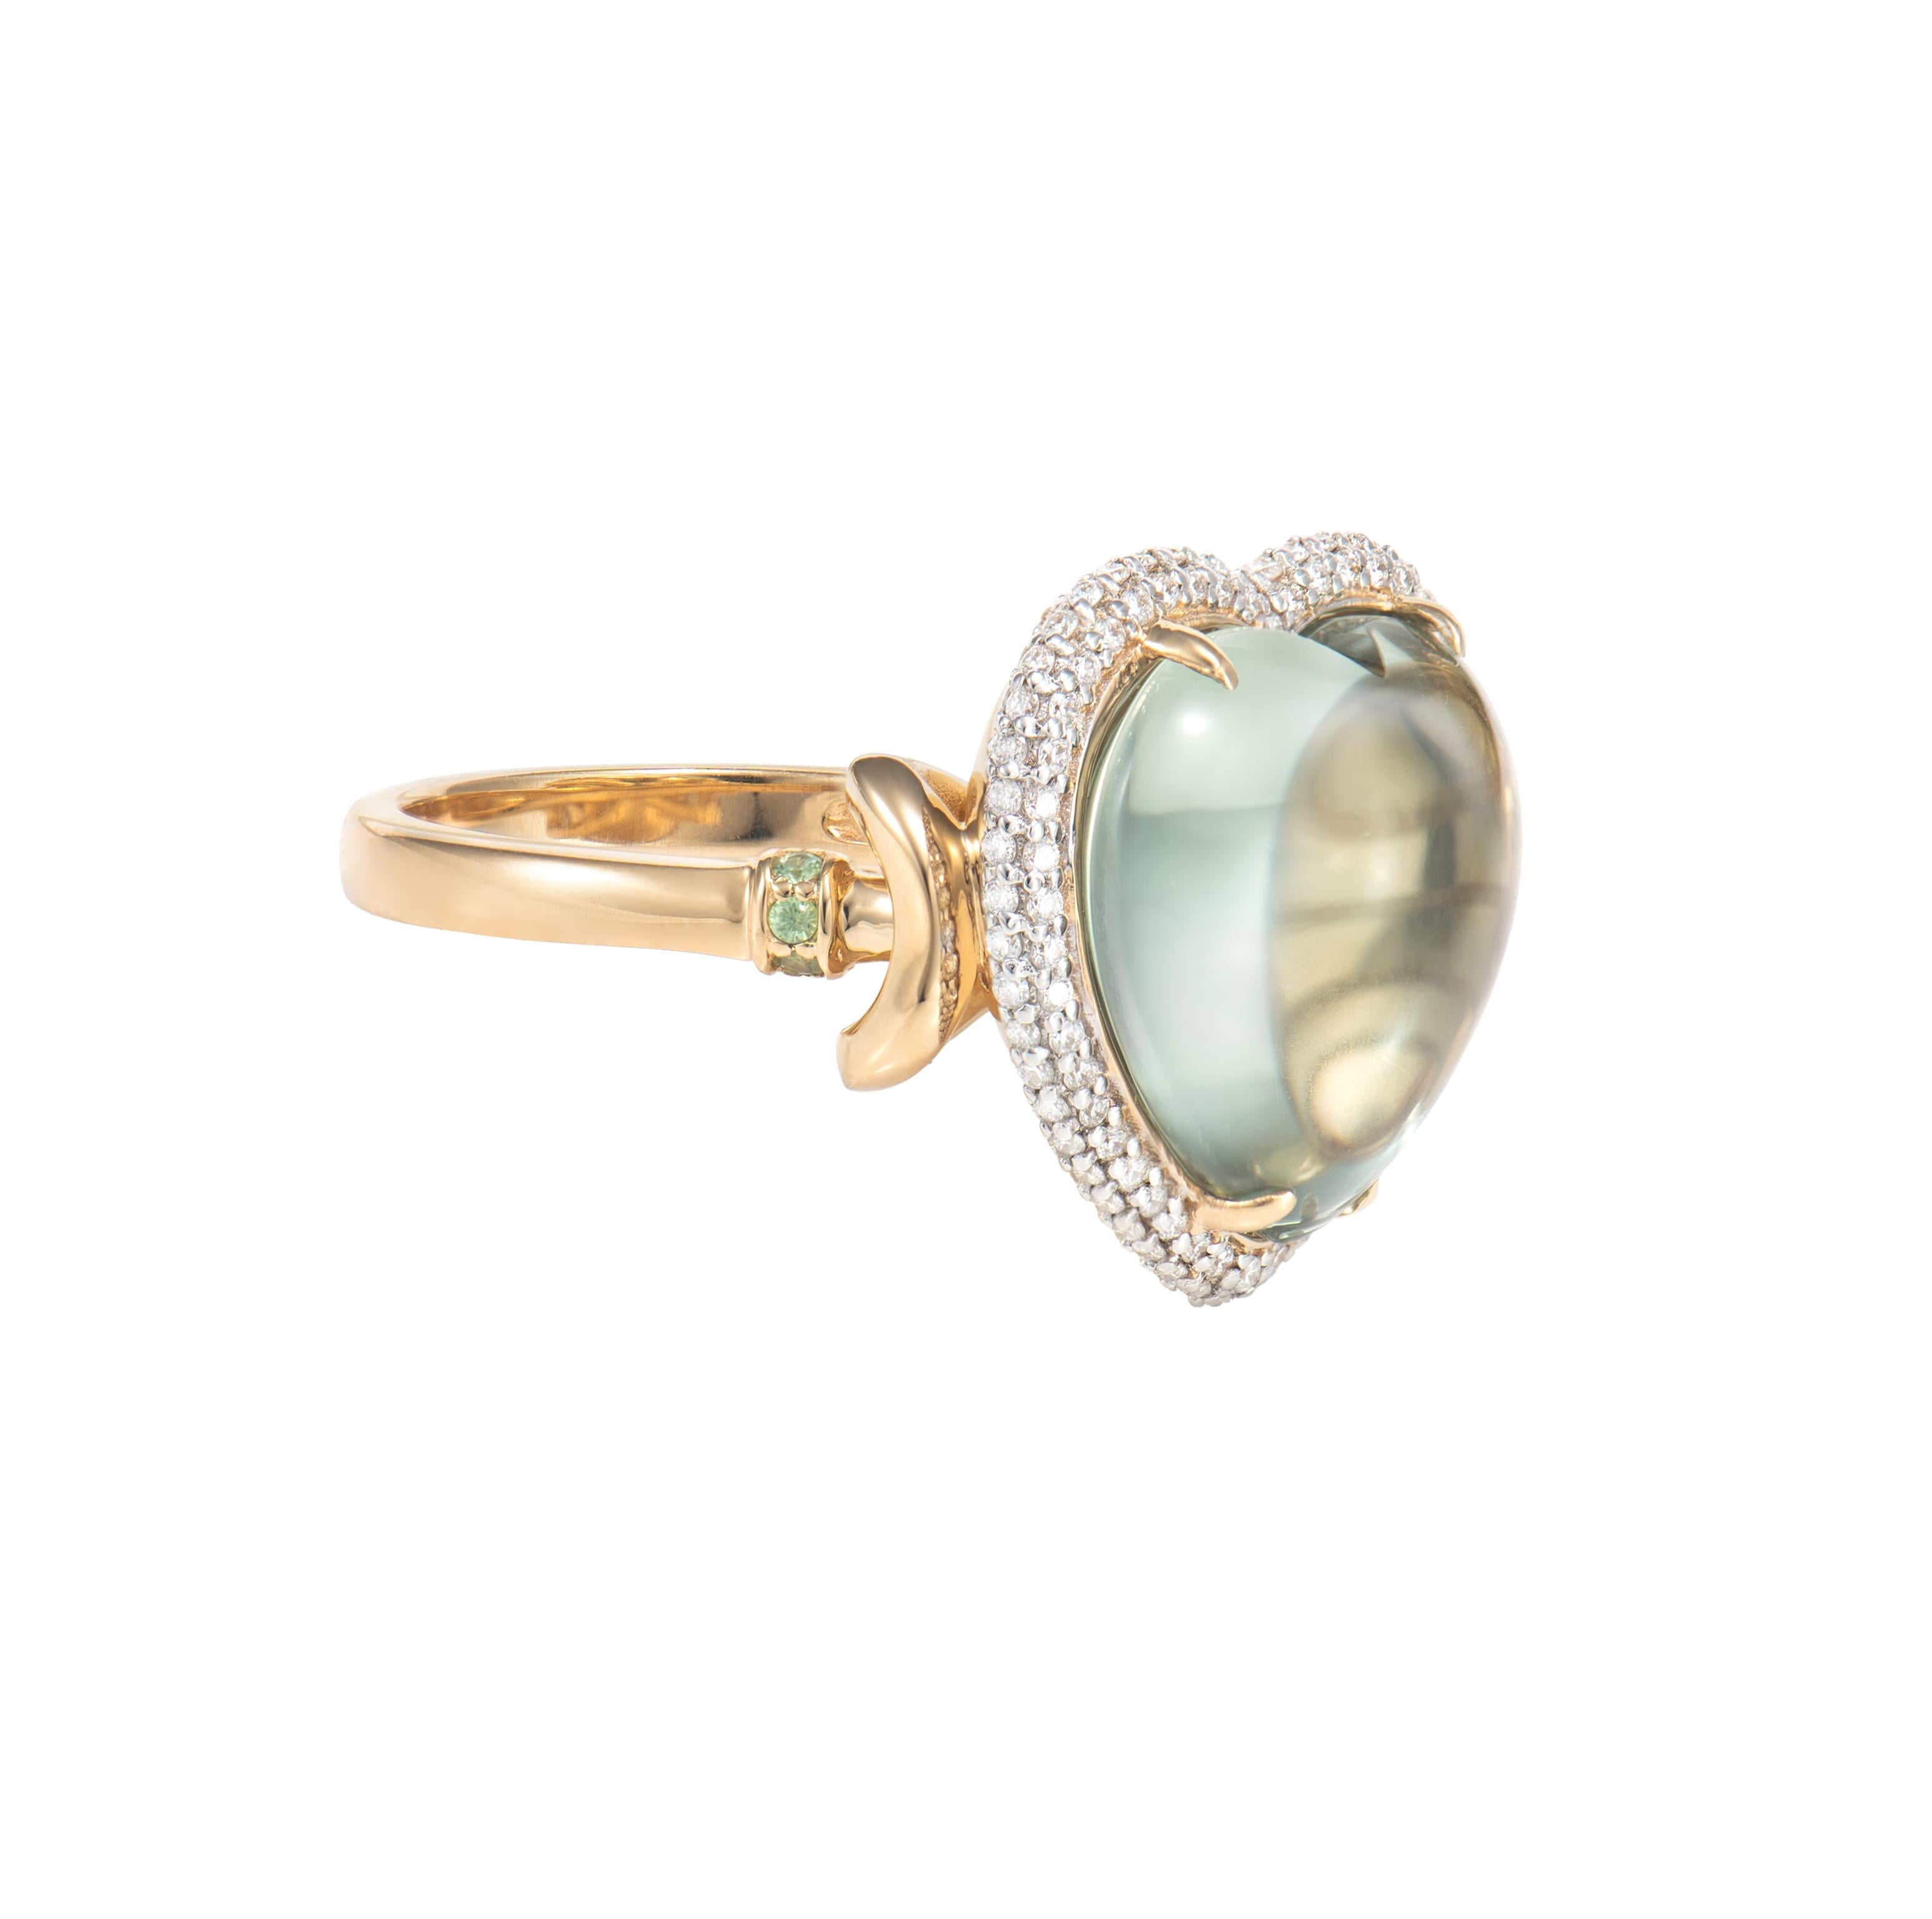 Celebrating the season of love with these delicate heart jewels! These pieces showcase beautiful gemstones with dainty accents to elevatue the beauty of the gem. 

Amethyst Ring in 18 Karat Yellow Gold with Green Sapphire and White Diamond.

Green